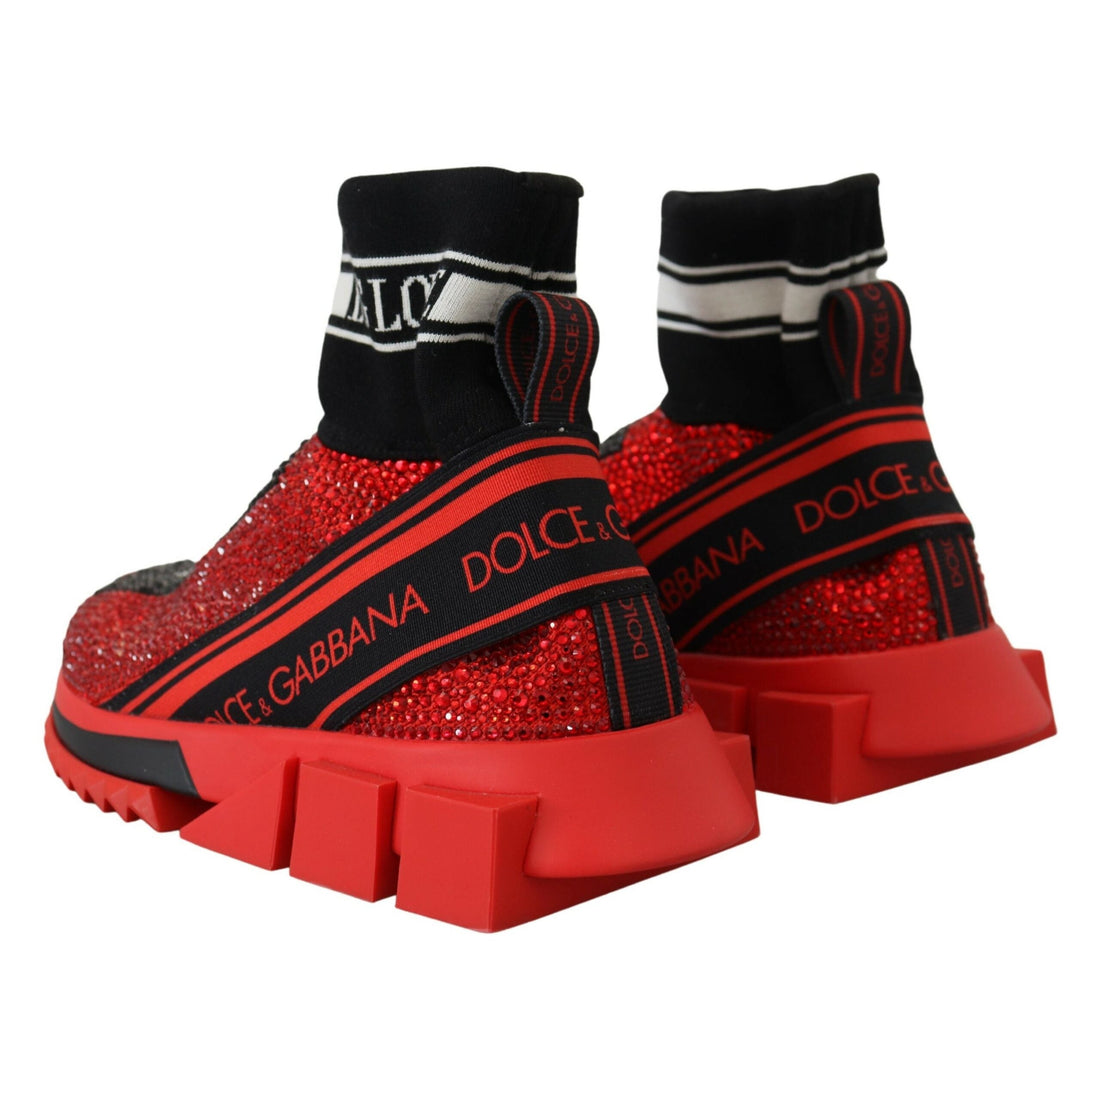 Dolce & Gabbana Exquisite Red Sorrento Slip-On Sneakers